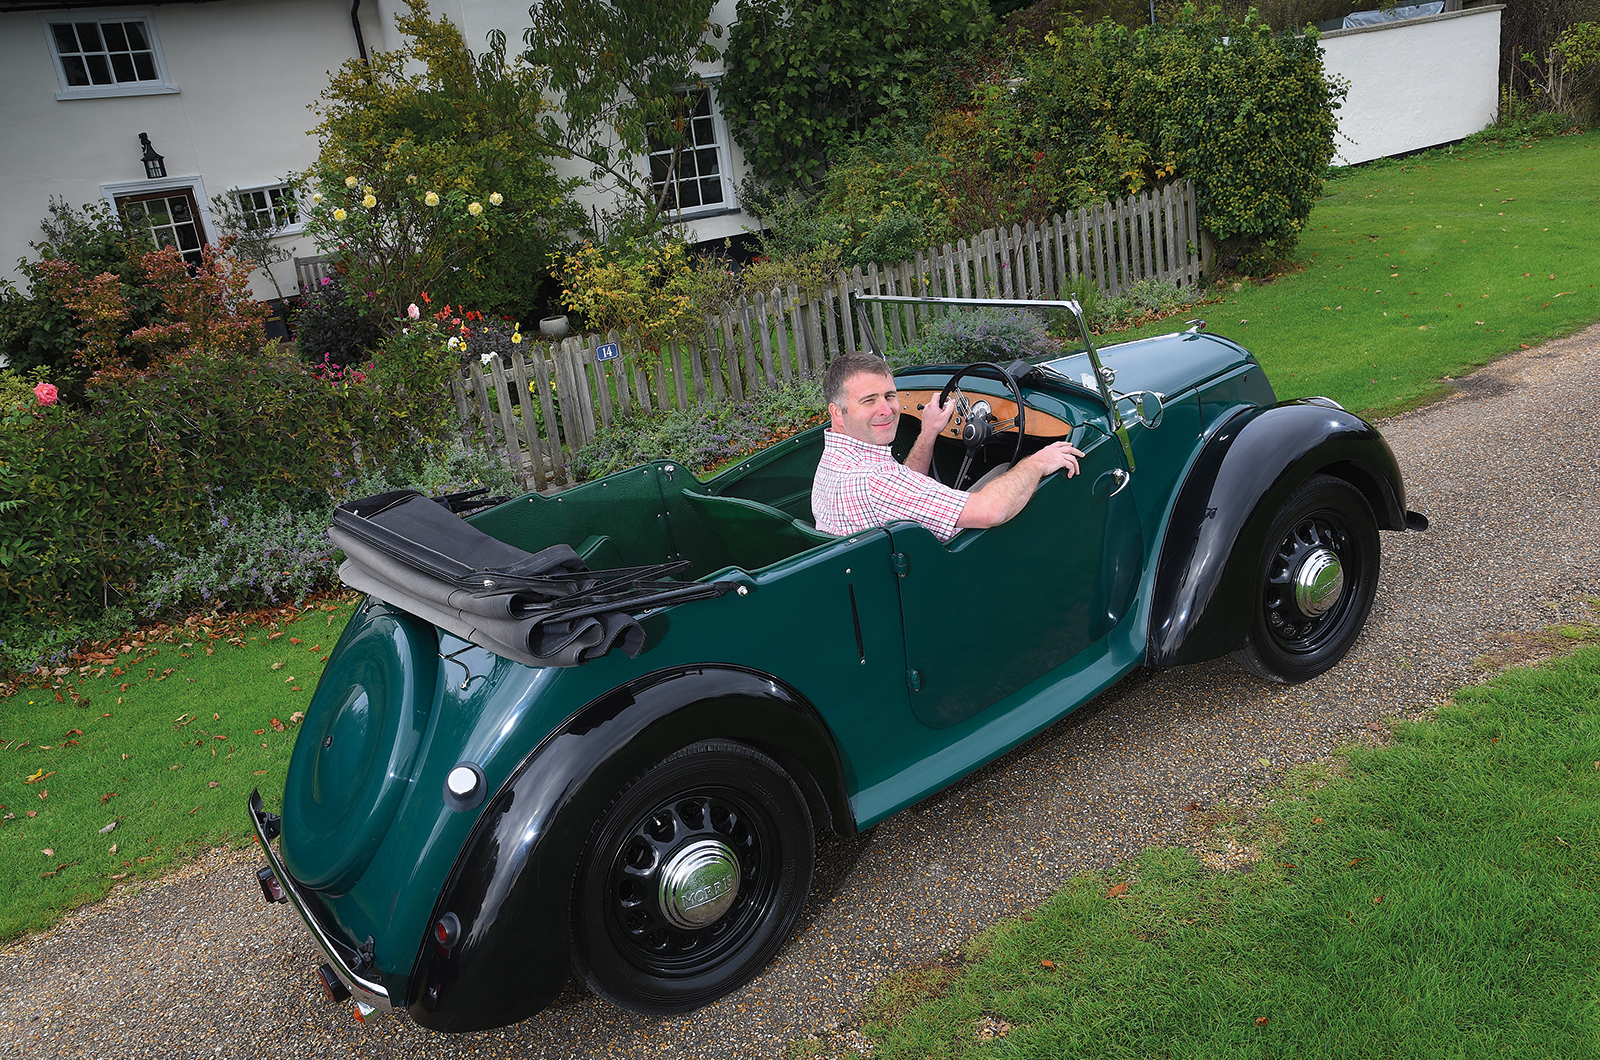 Classic & Sports Car – Is a Morris Eight the perfect starter classic?